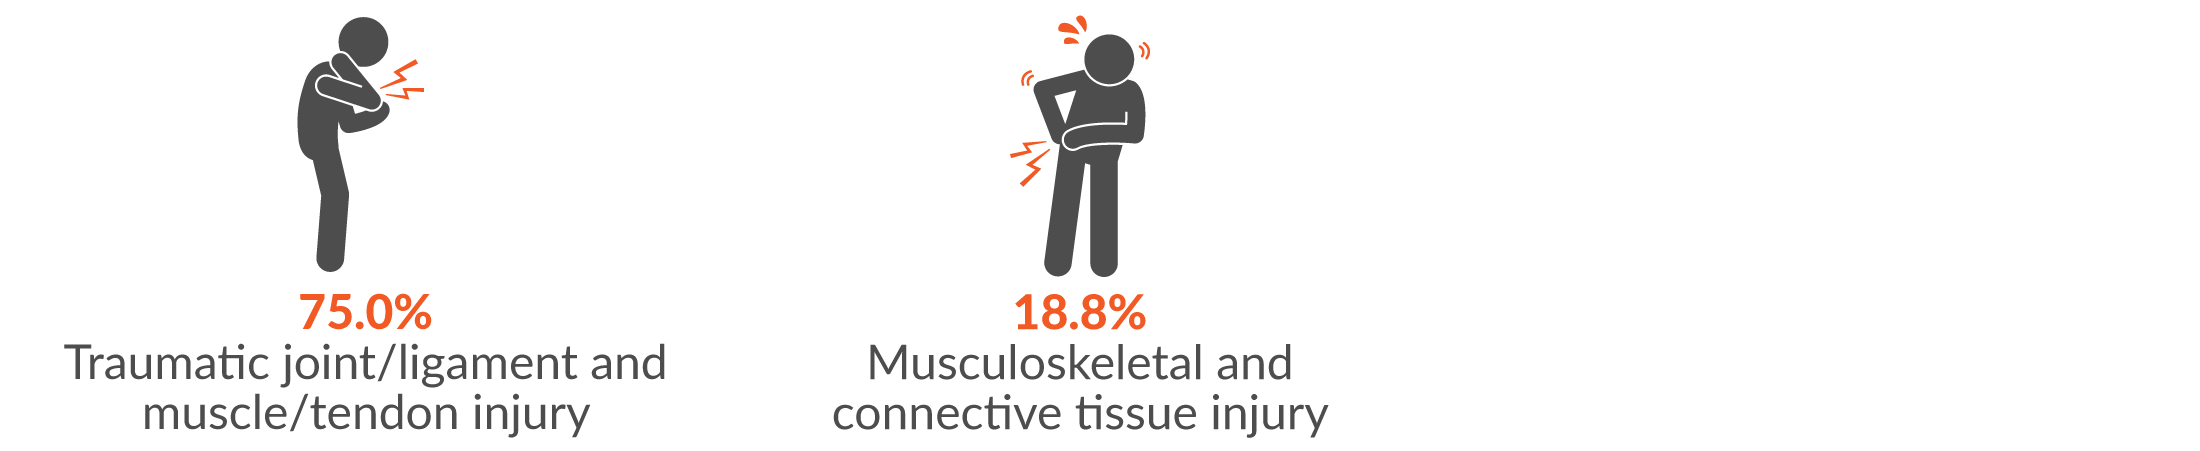 This infographic shows the main two injury groups resulting from body stressing were 71.4% traumatic joint/ligament and muscle/tendon injury; and 21.4% musculoskeletal and connective tissue injury.